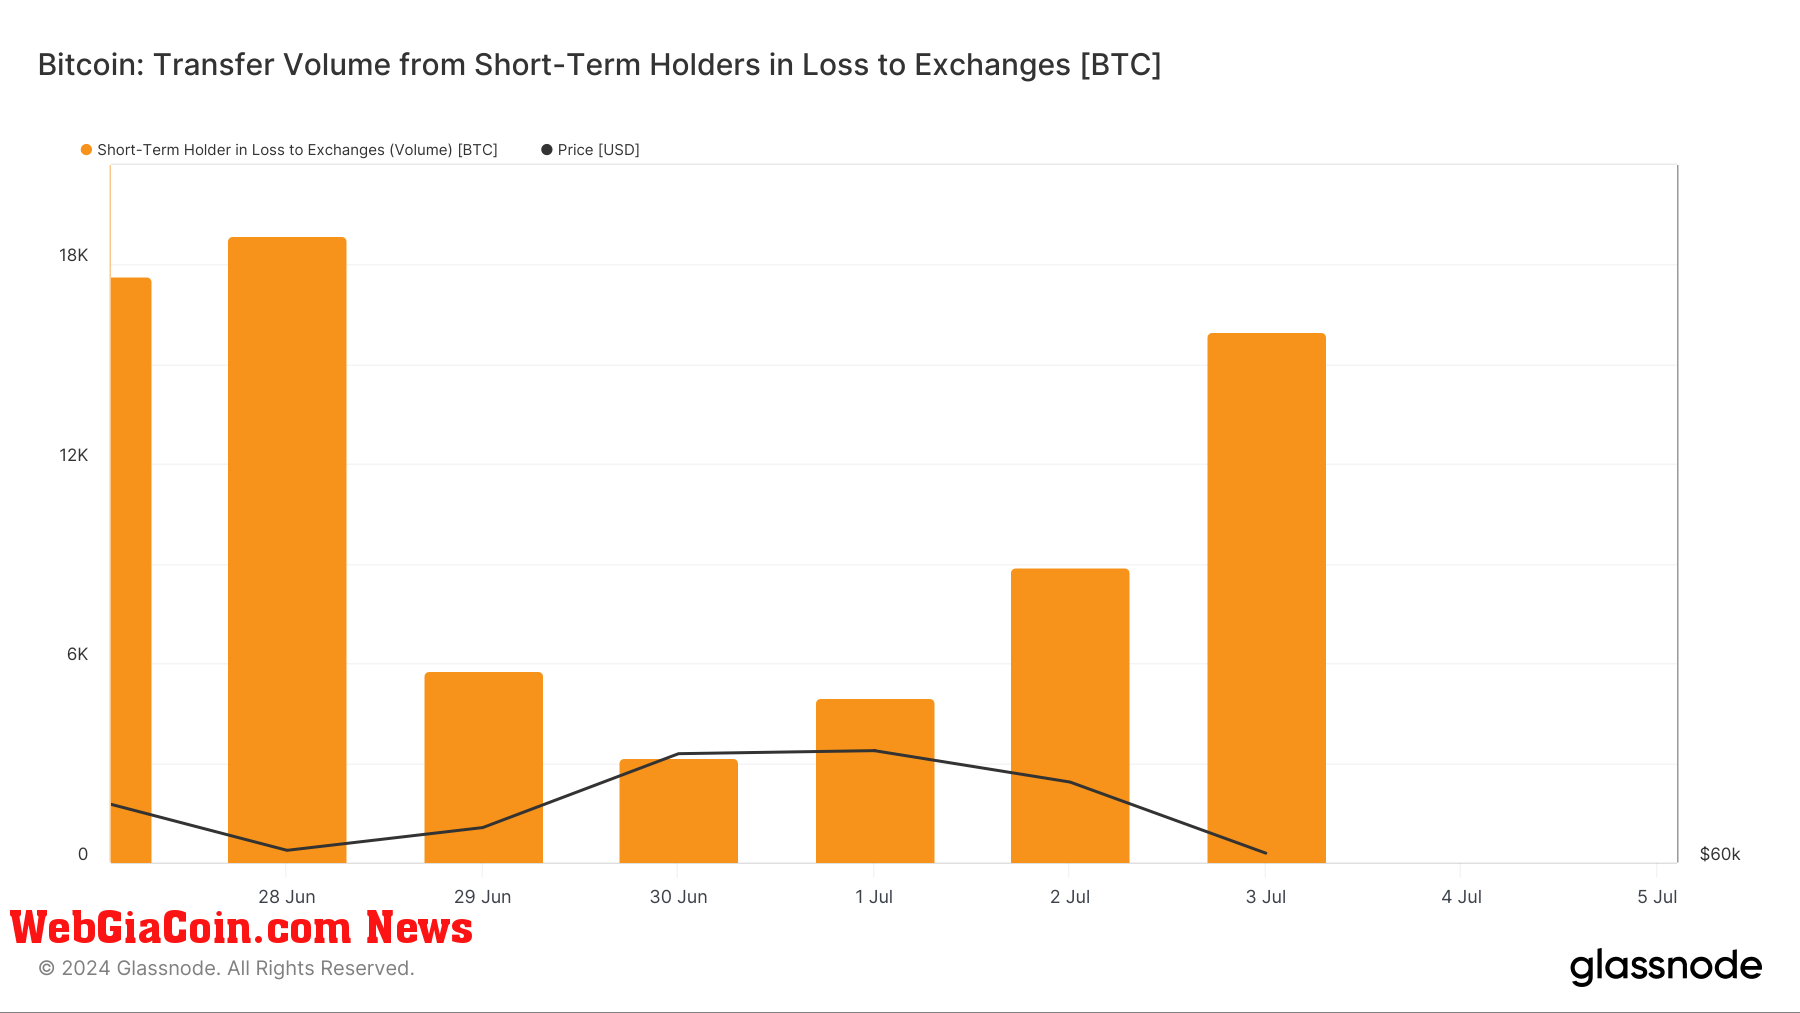 STH in loss to exchanges